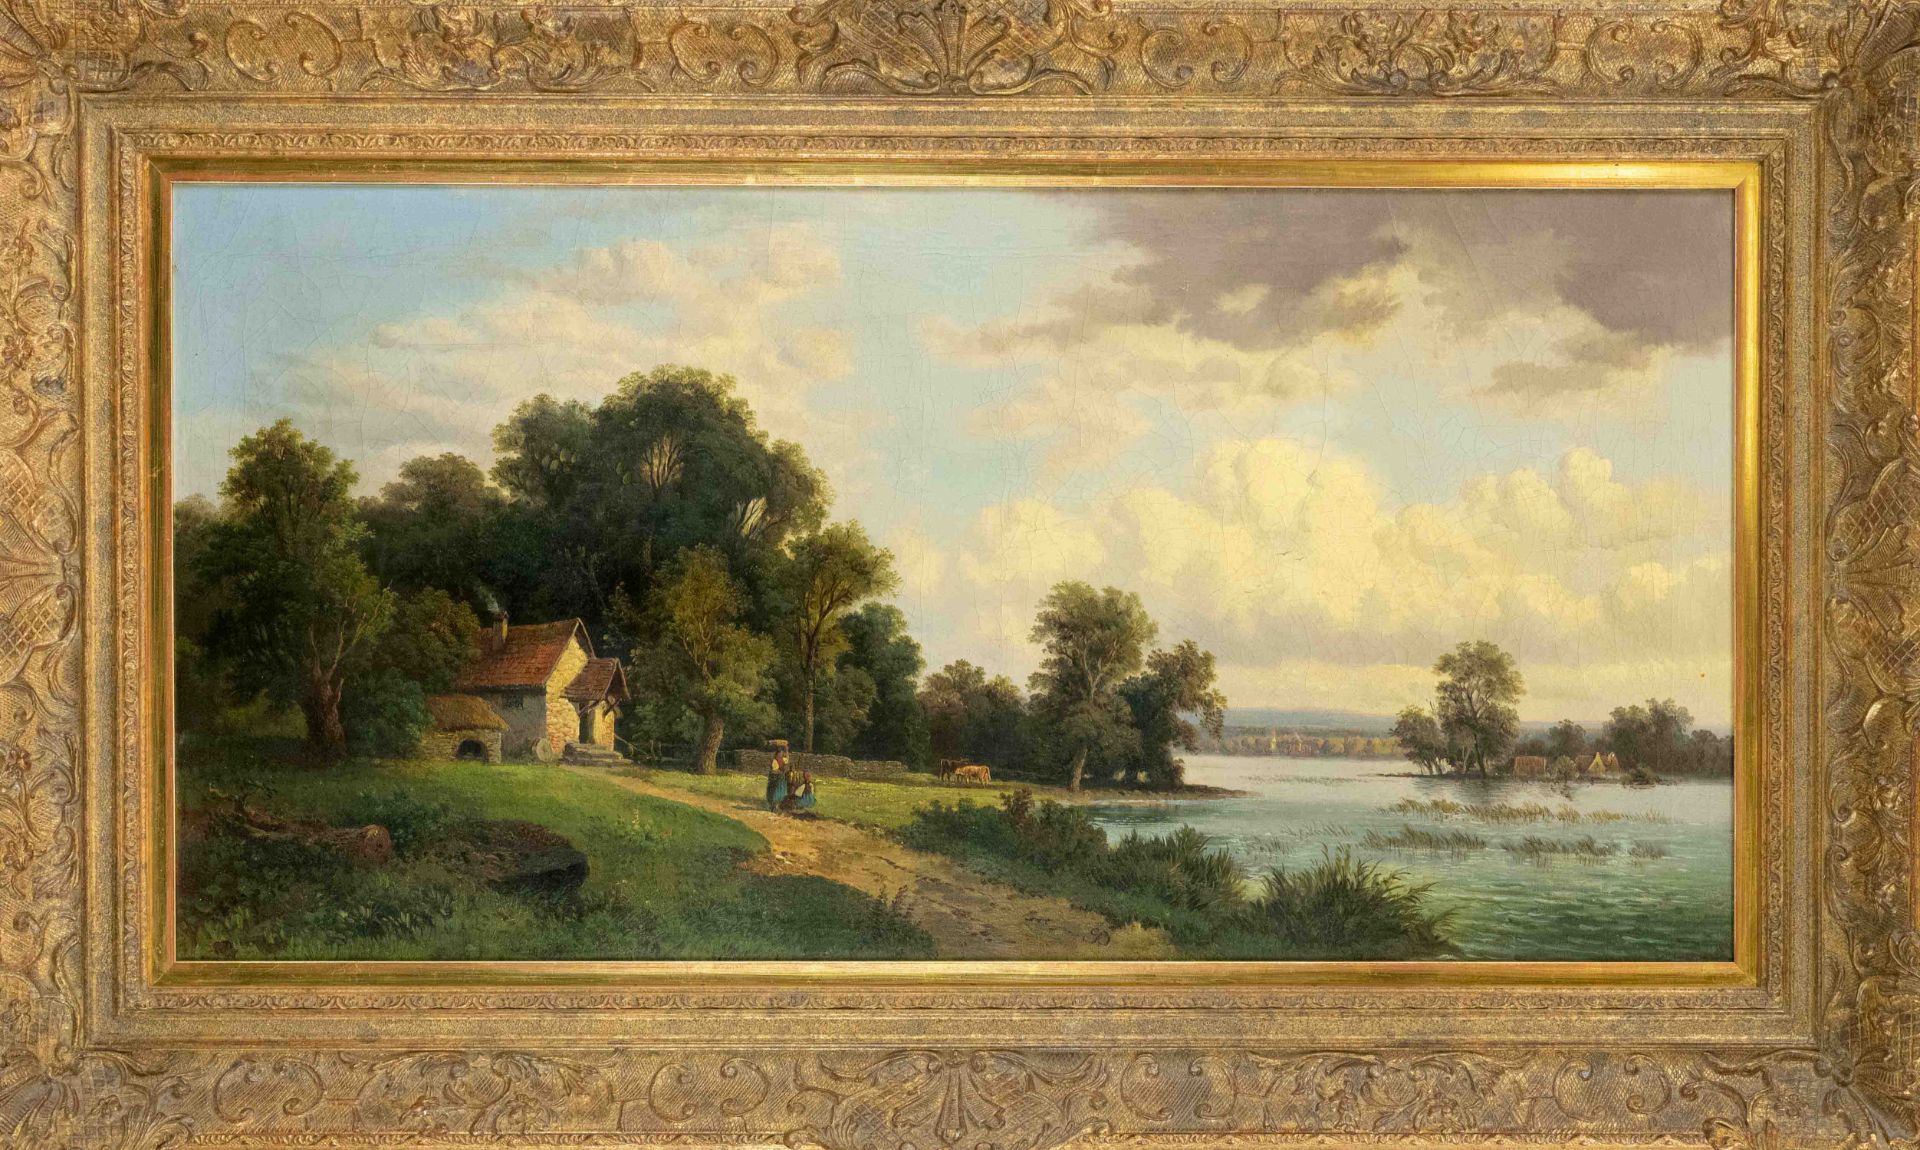 Unidentified painter of the 19th century, large country idyll with lakeside chapel and staffage, oil